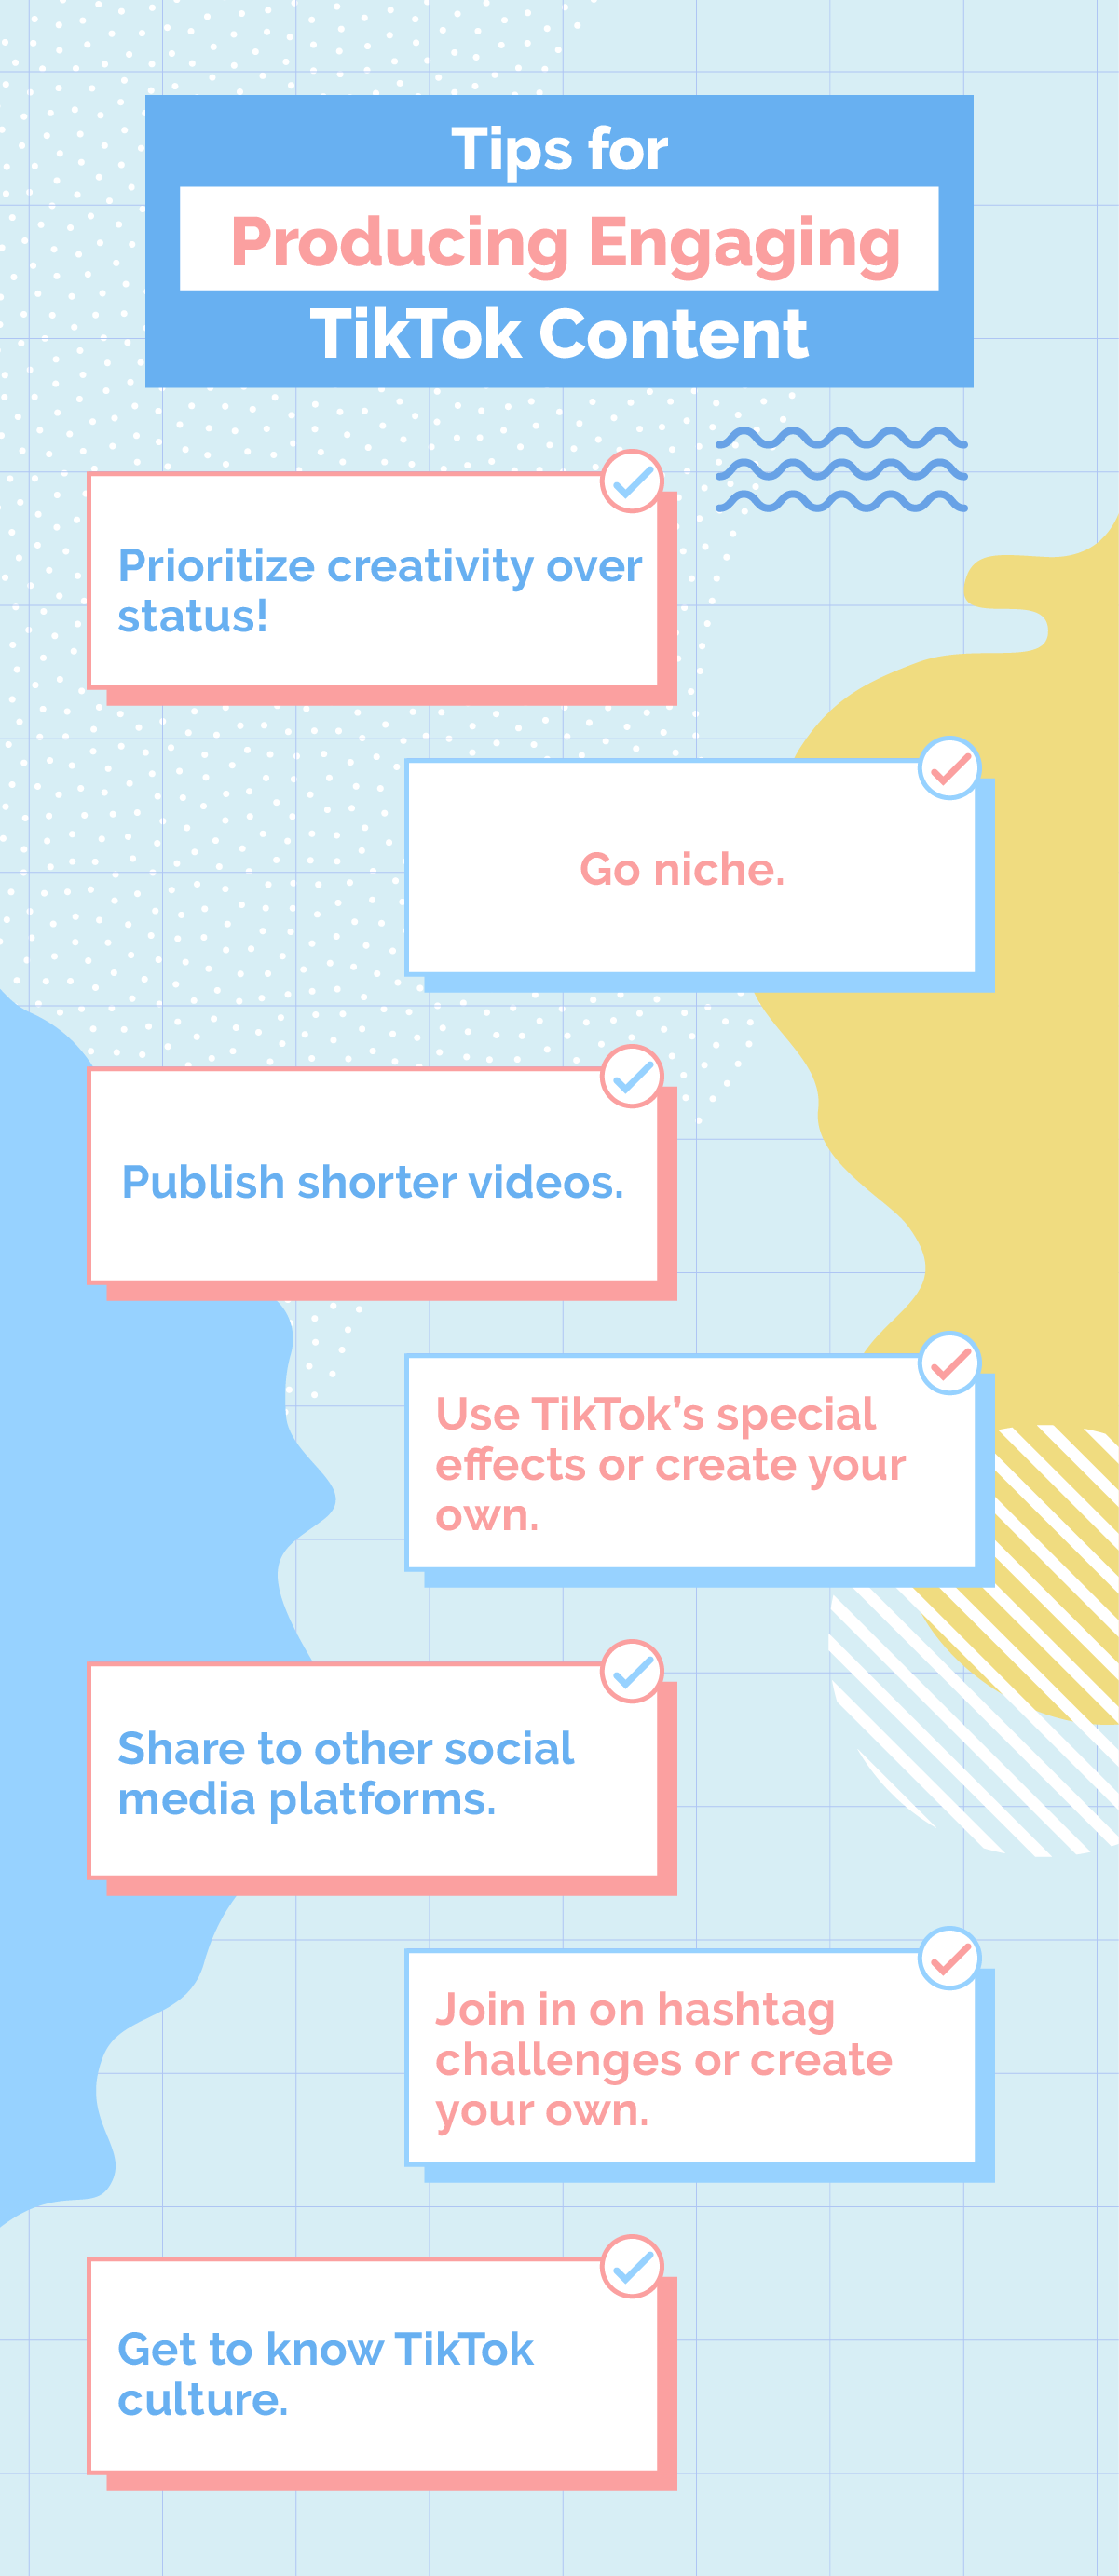 Artwork 5 - Tips for producing engaging TikTok Content